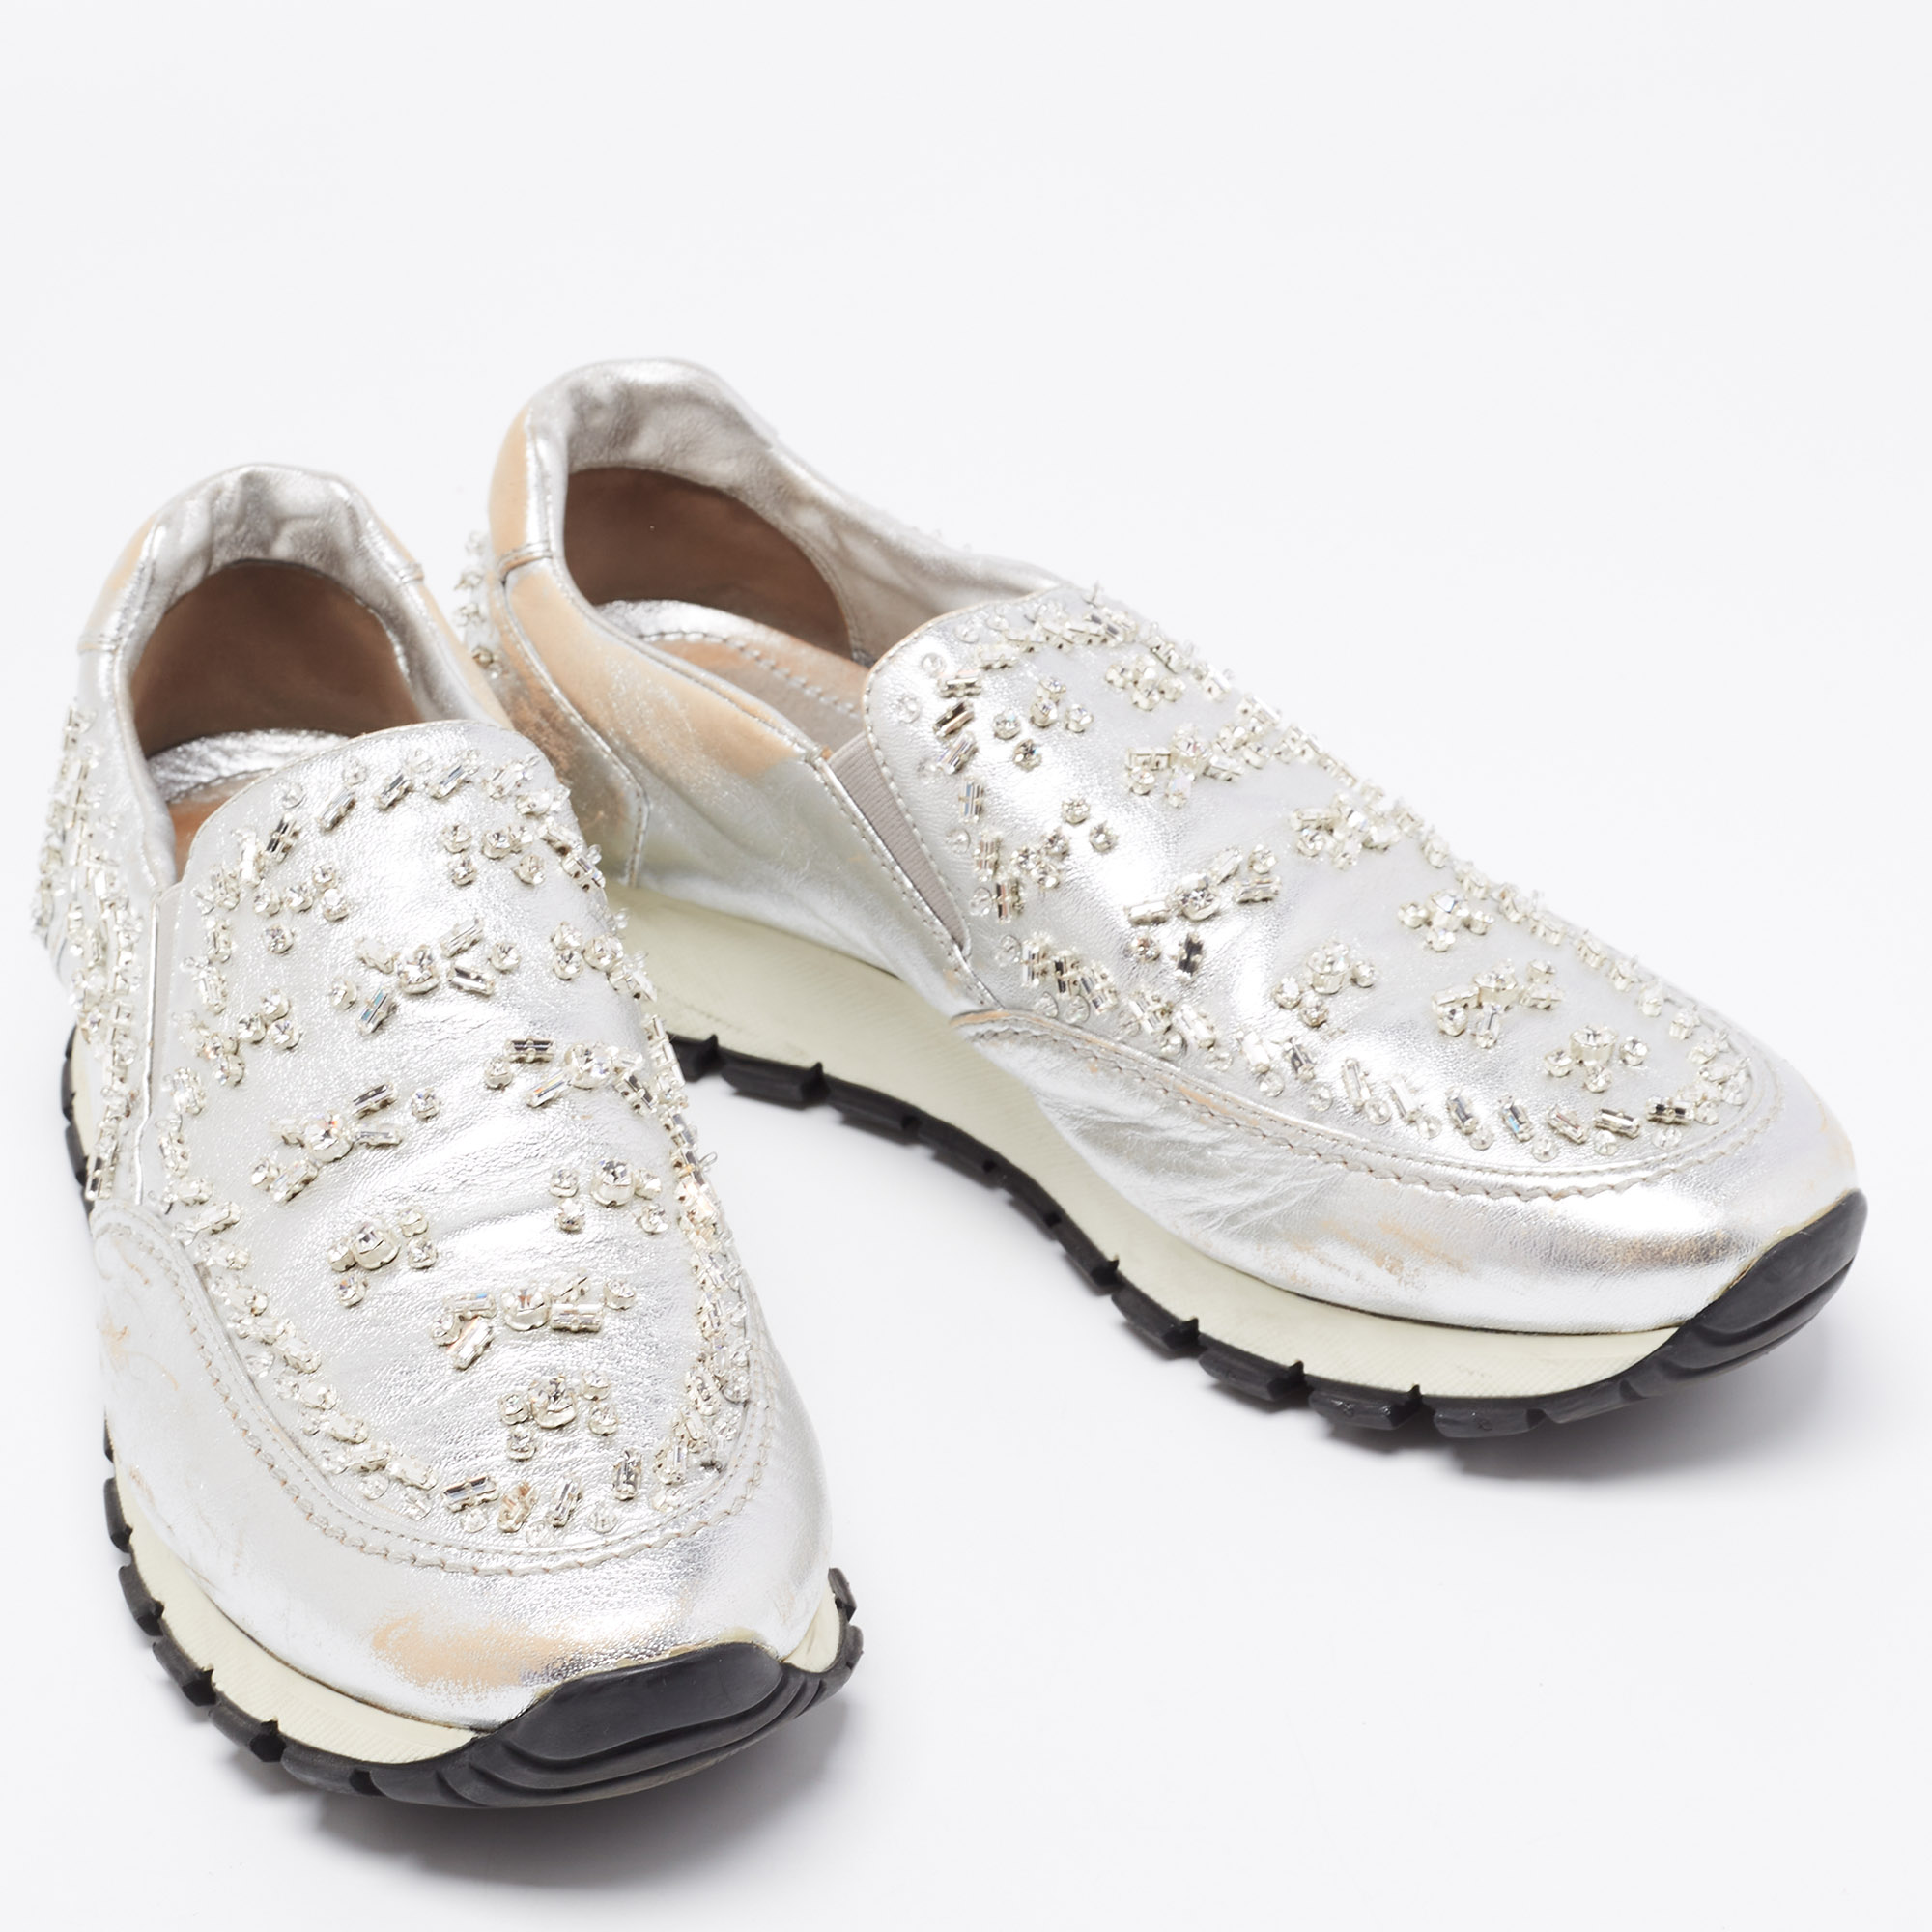 Prada Silver Leather Embellished Slip On Sneakers Size 41